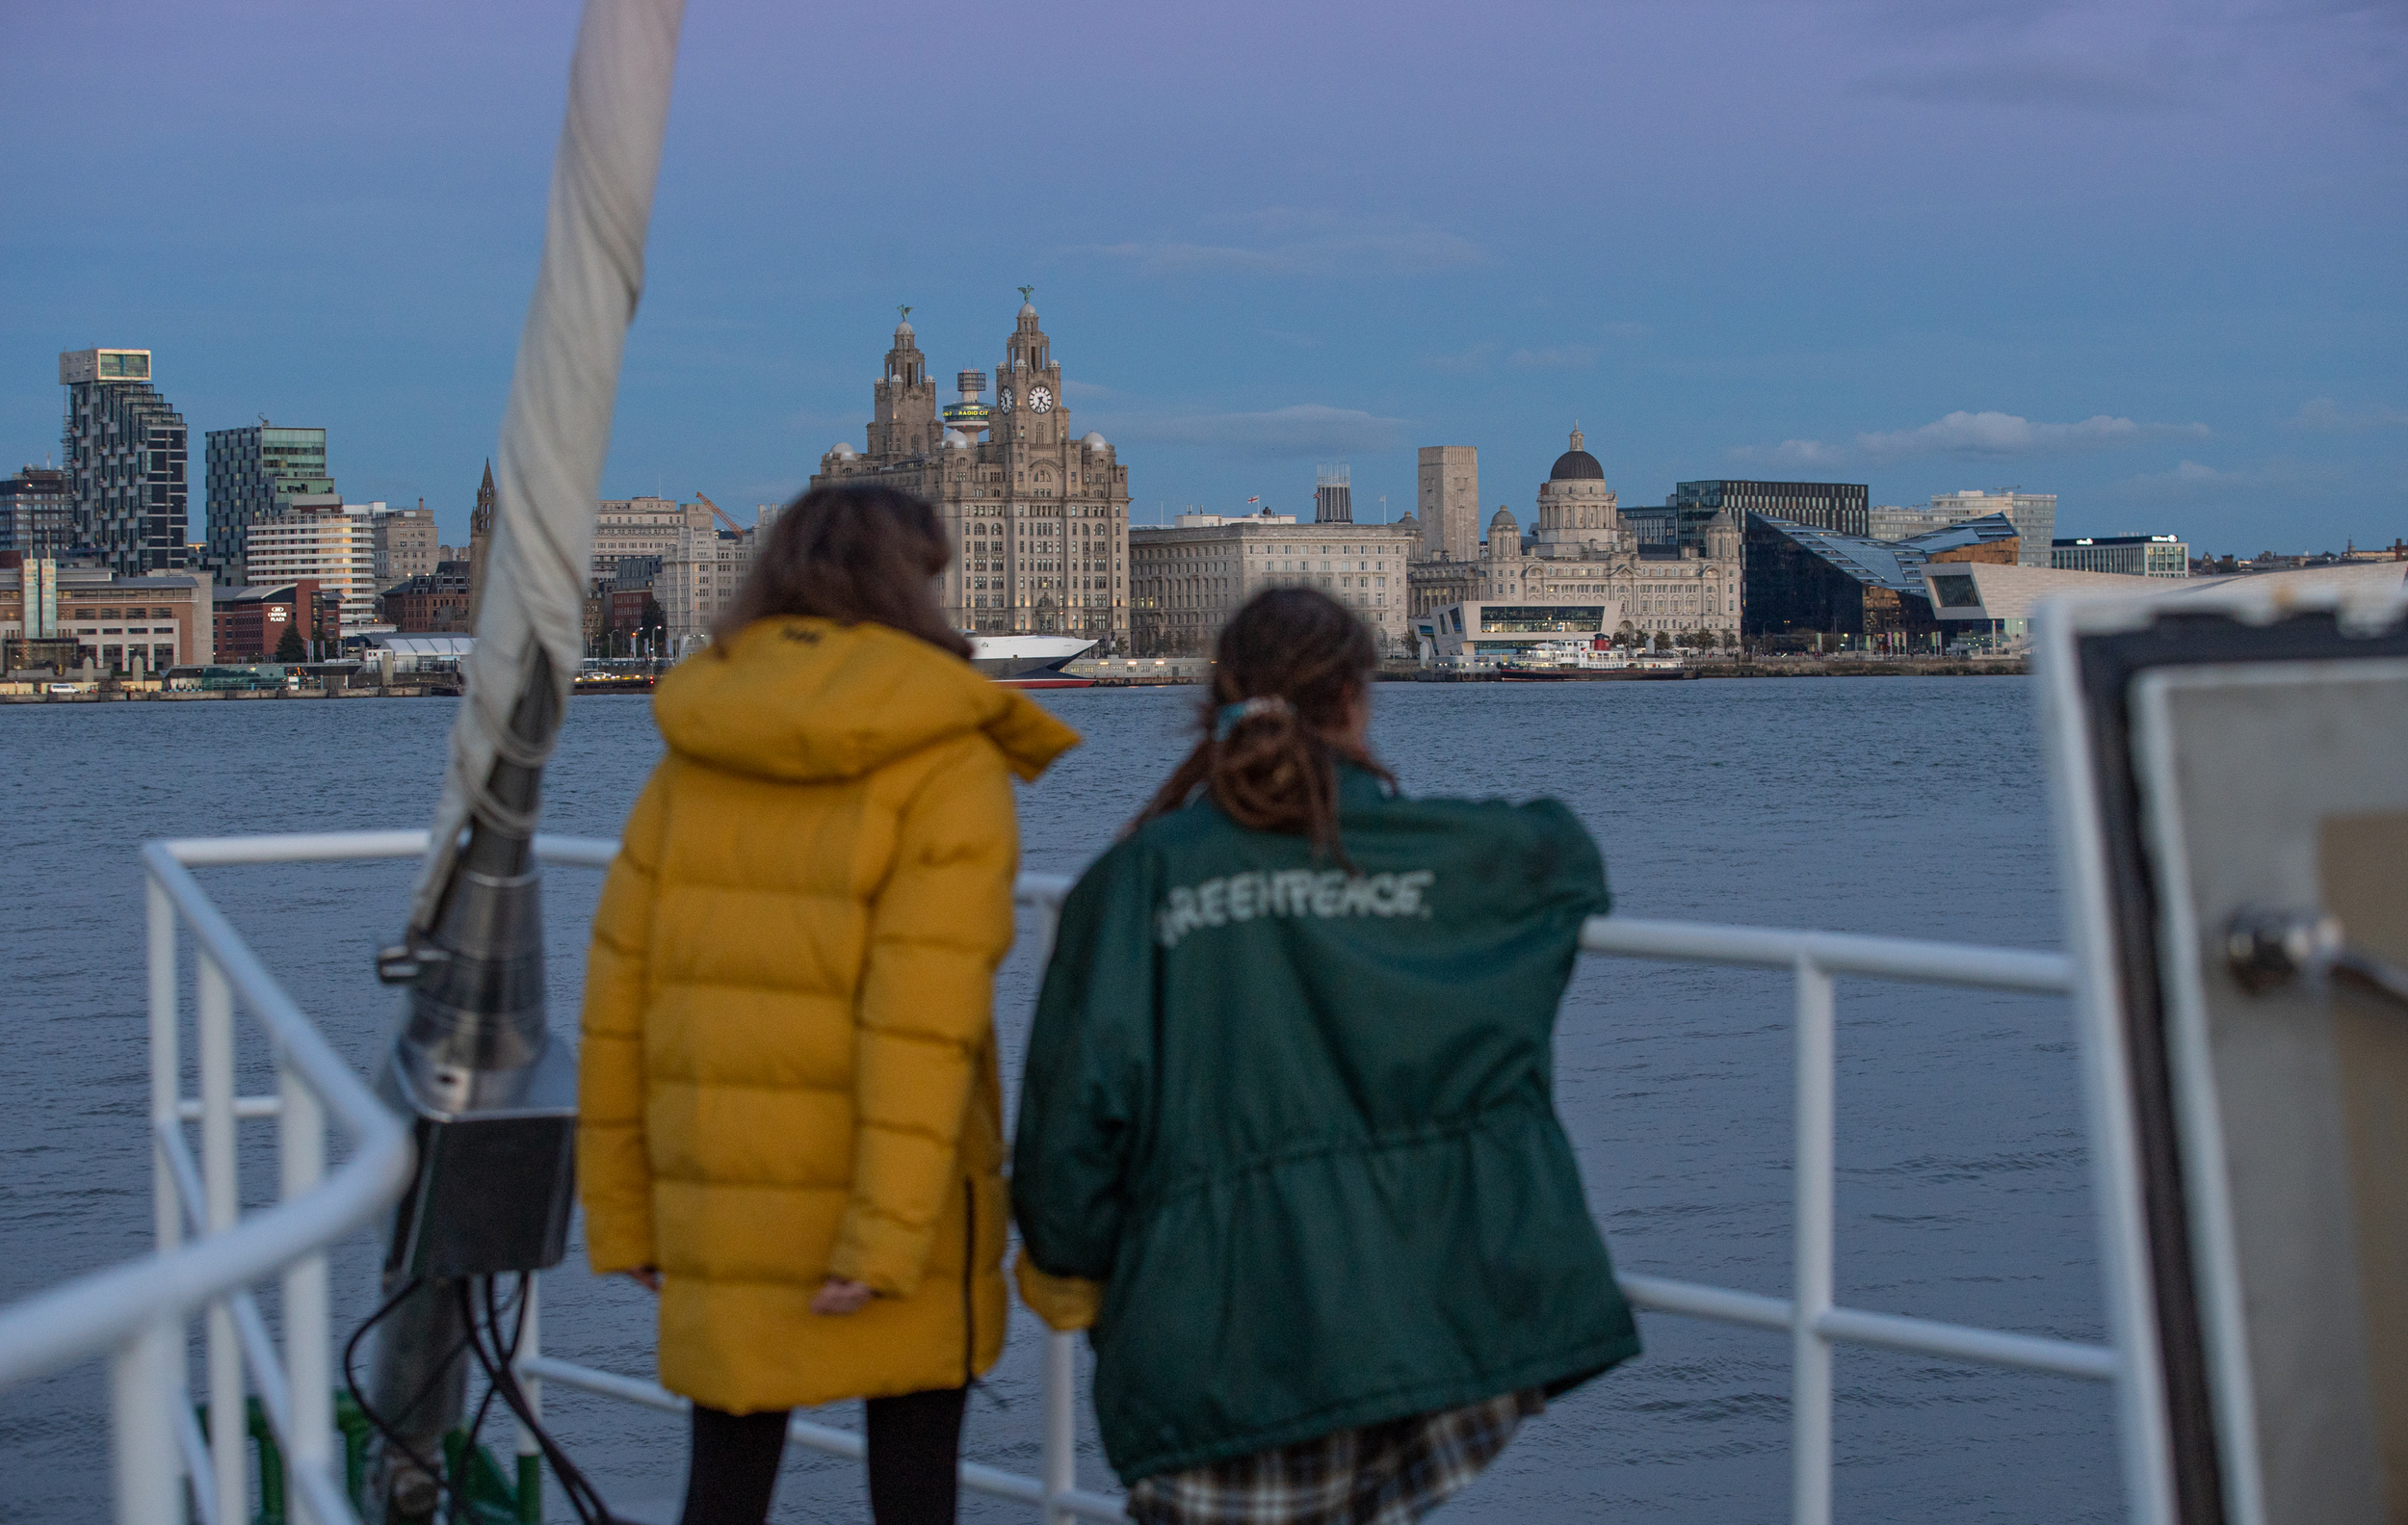 The Greenpeace ship the Rainbow Warrior leaves Liverpool and begins the journey to COP26 in Glasgow.